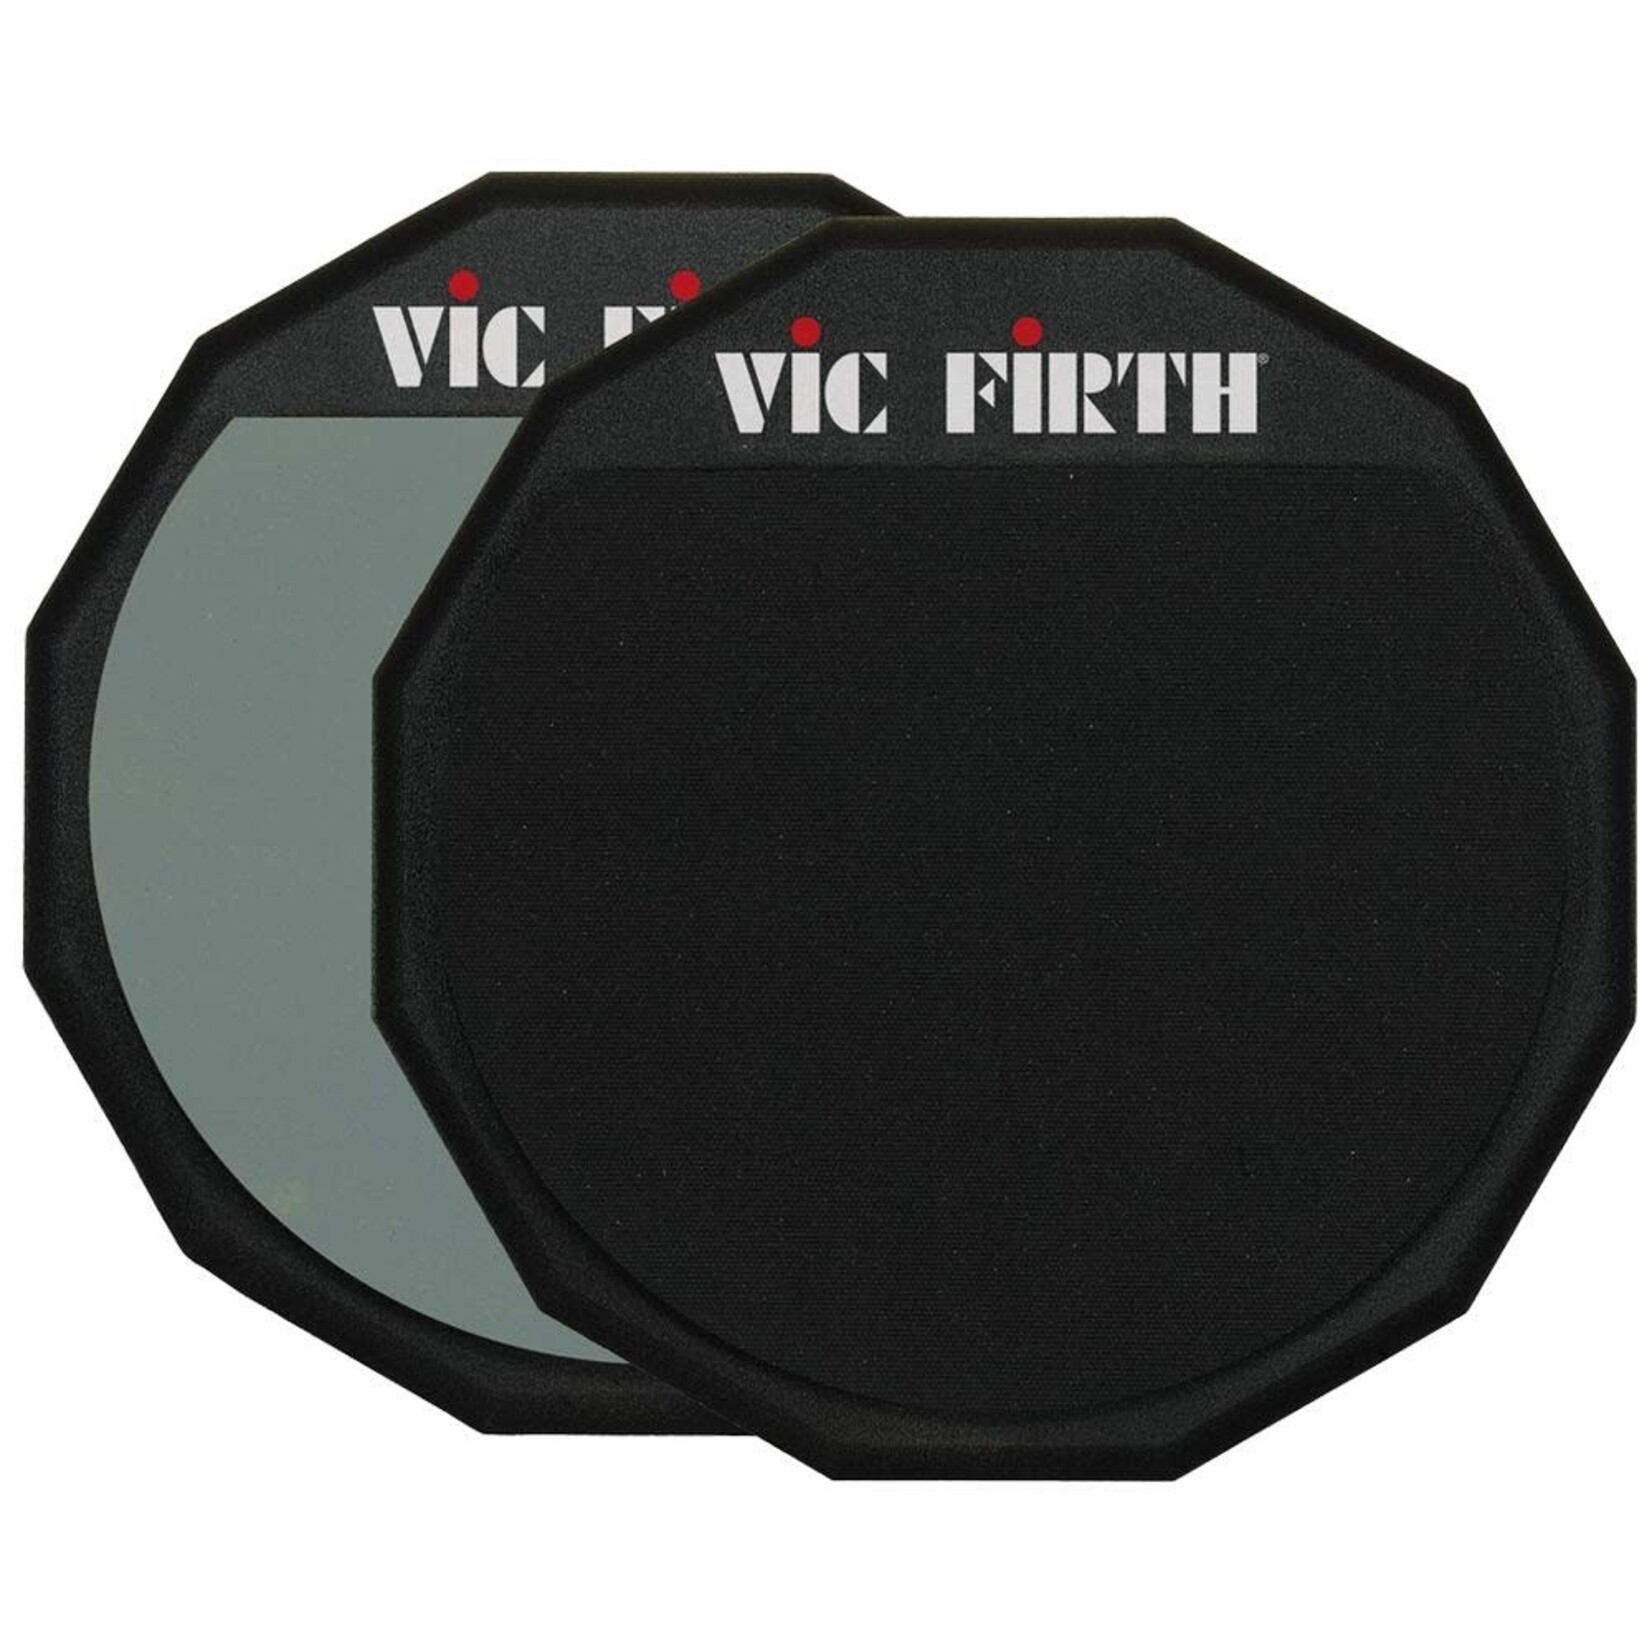 Vic Firth Vic Firth 12" Double Sided Practice Pad